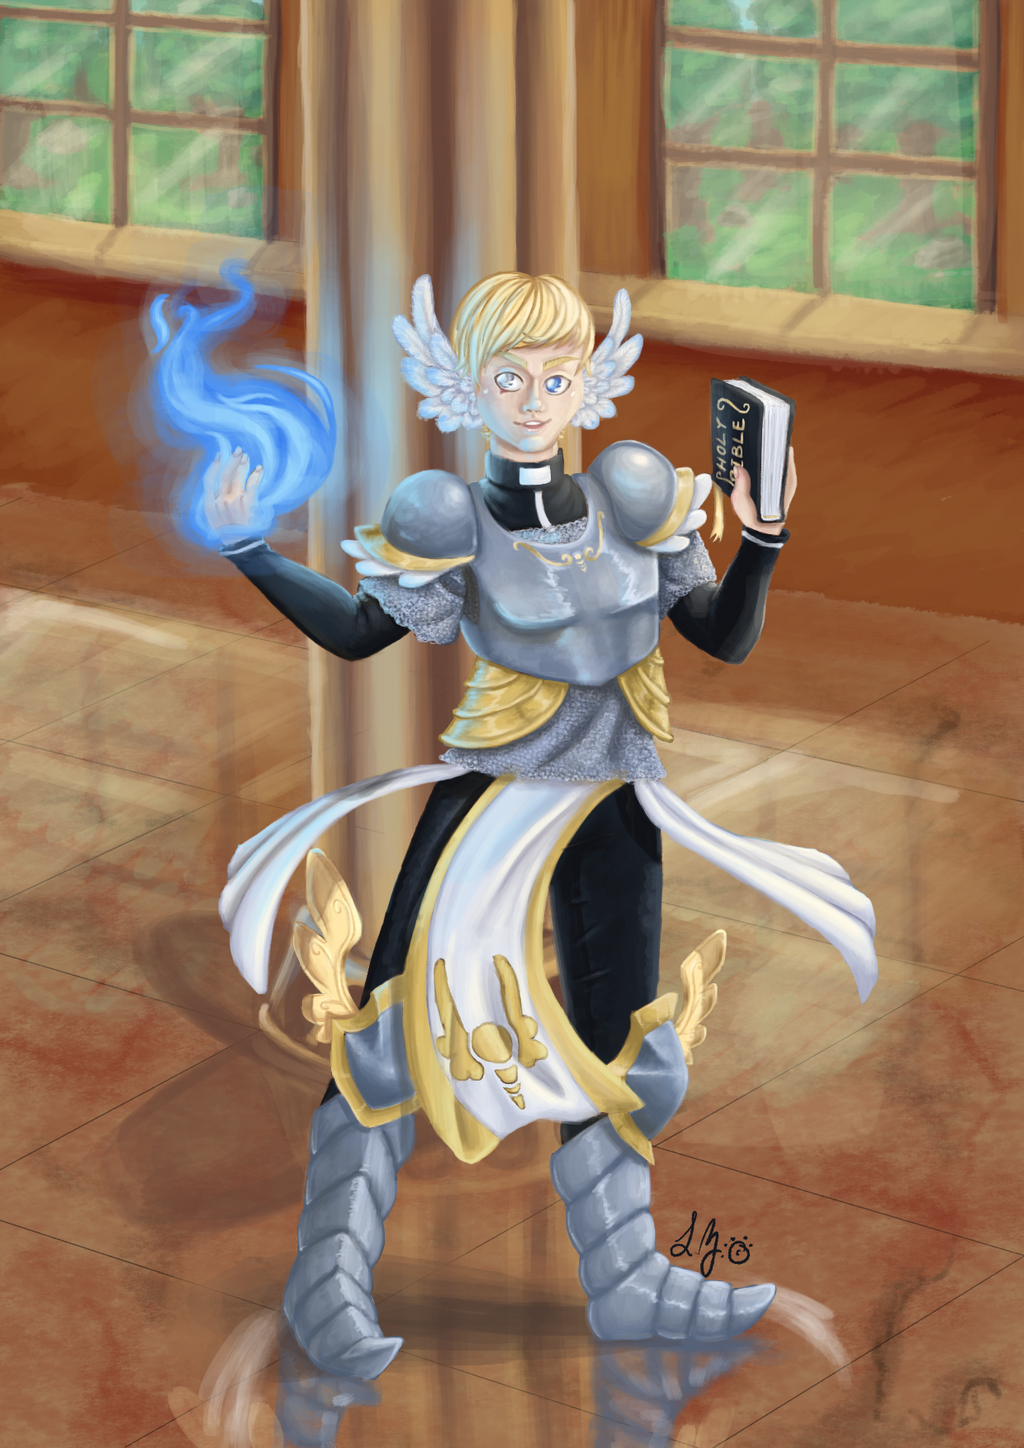 Declan, The Life Cleric